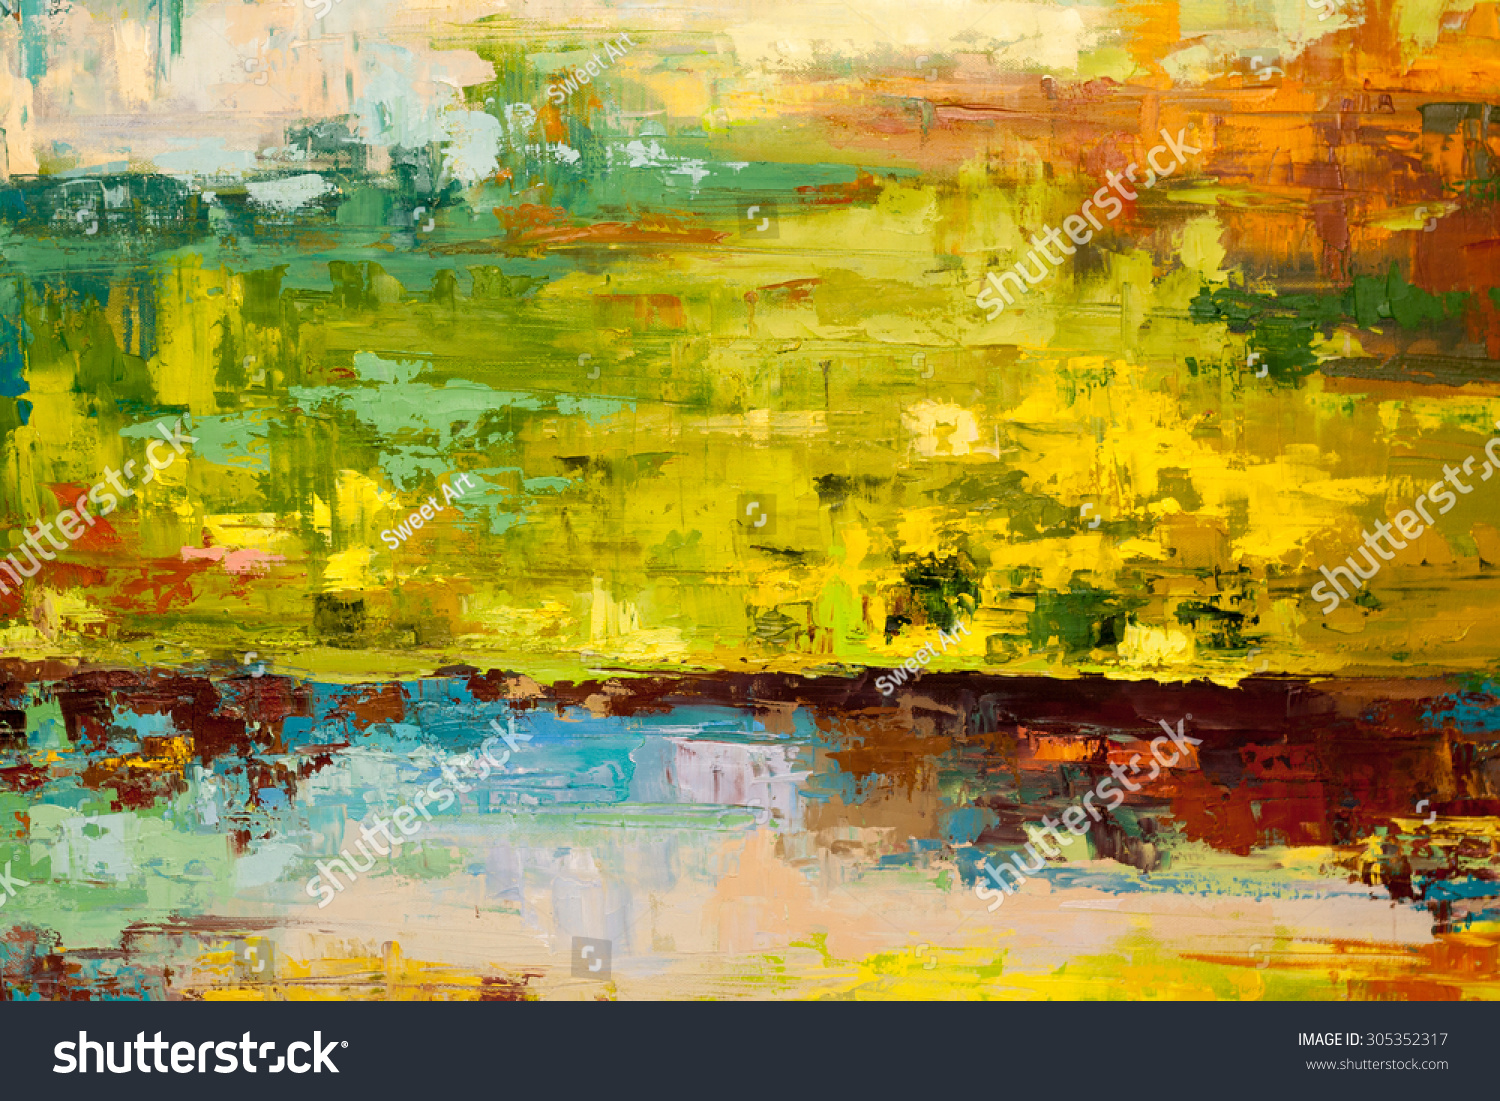 Abstract Art Background Oil Painting On Stock Illustration 305352317 ...